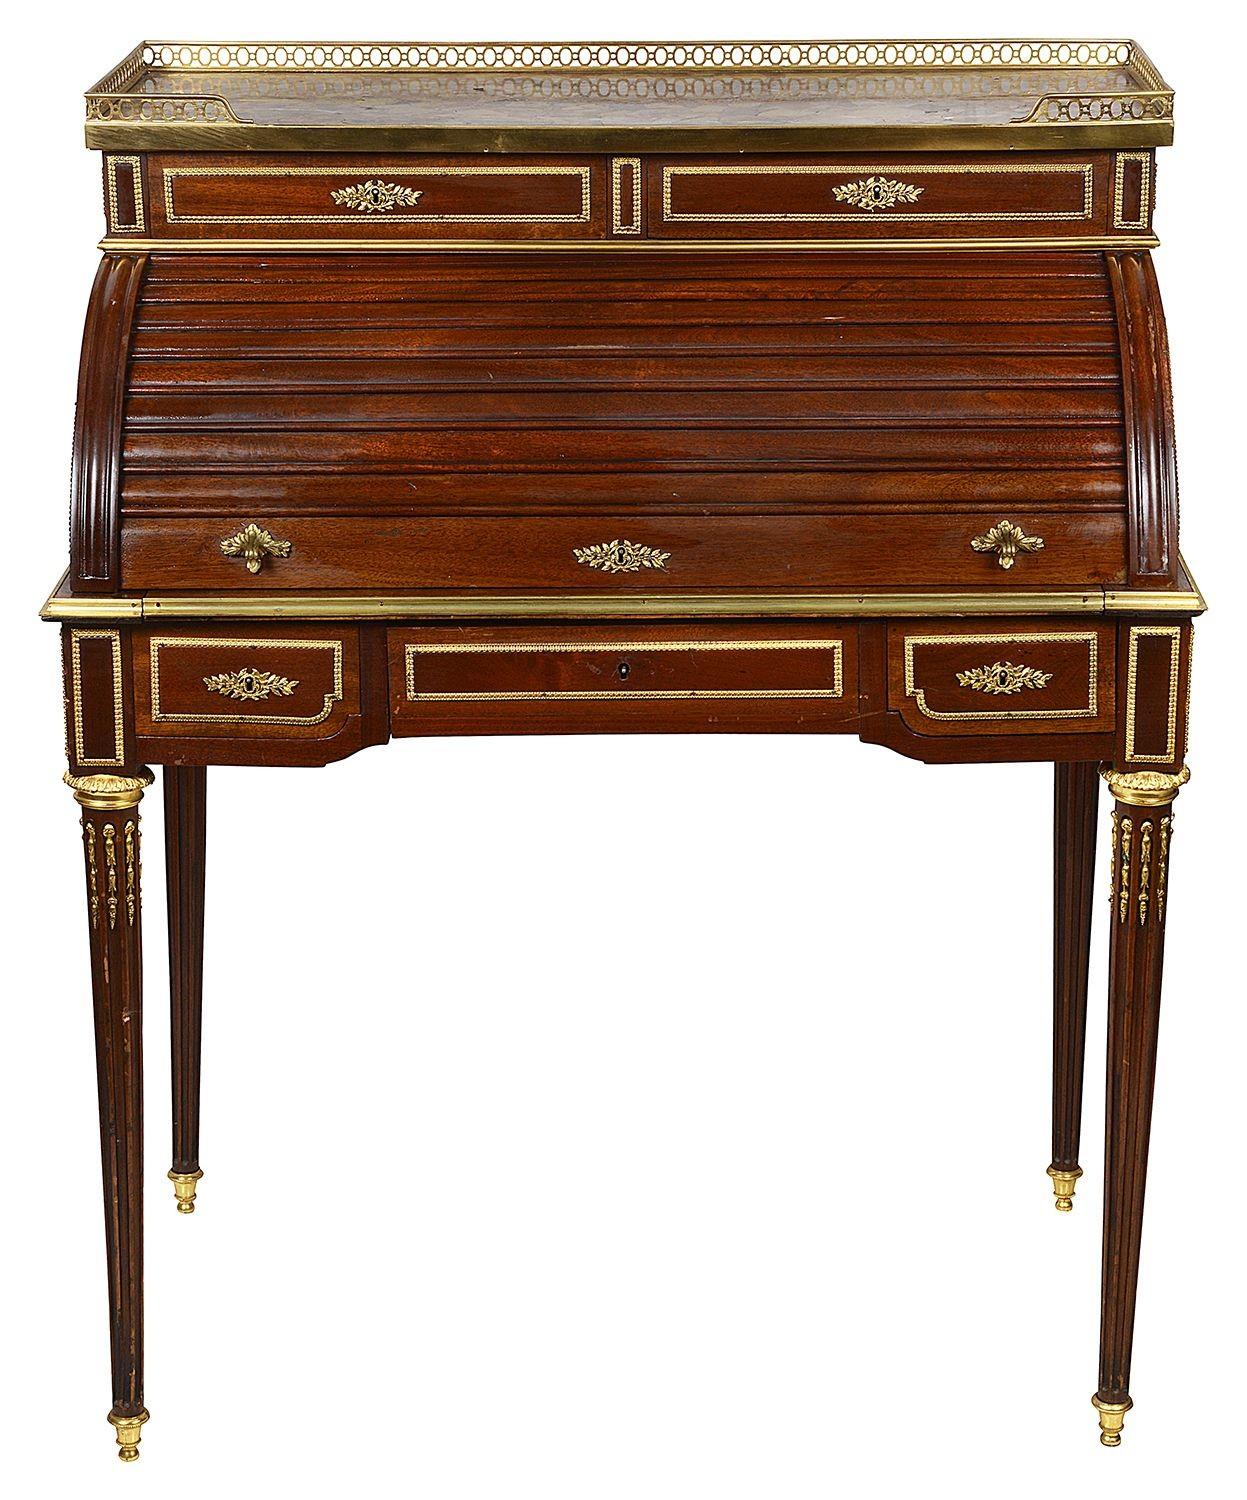 A very good quality late 19th Century French Louis XVI style Mahogany tambour bureau, having a marble top with a brass gallery. Pigeon hole compartments and drawers within, gilded omolu moldings, two frieze drawers and raised on turned tapering